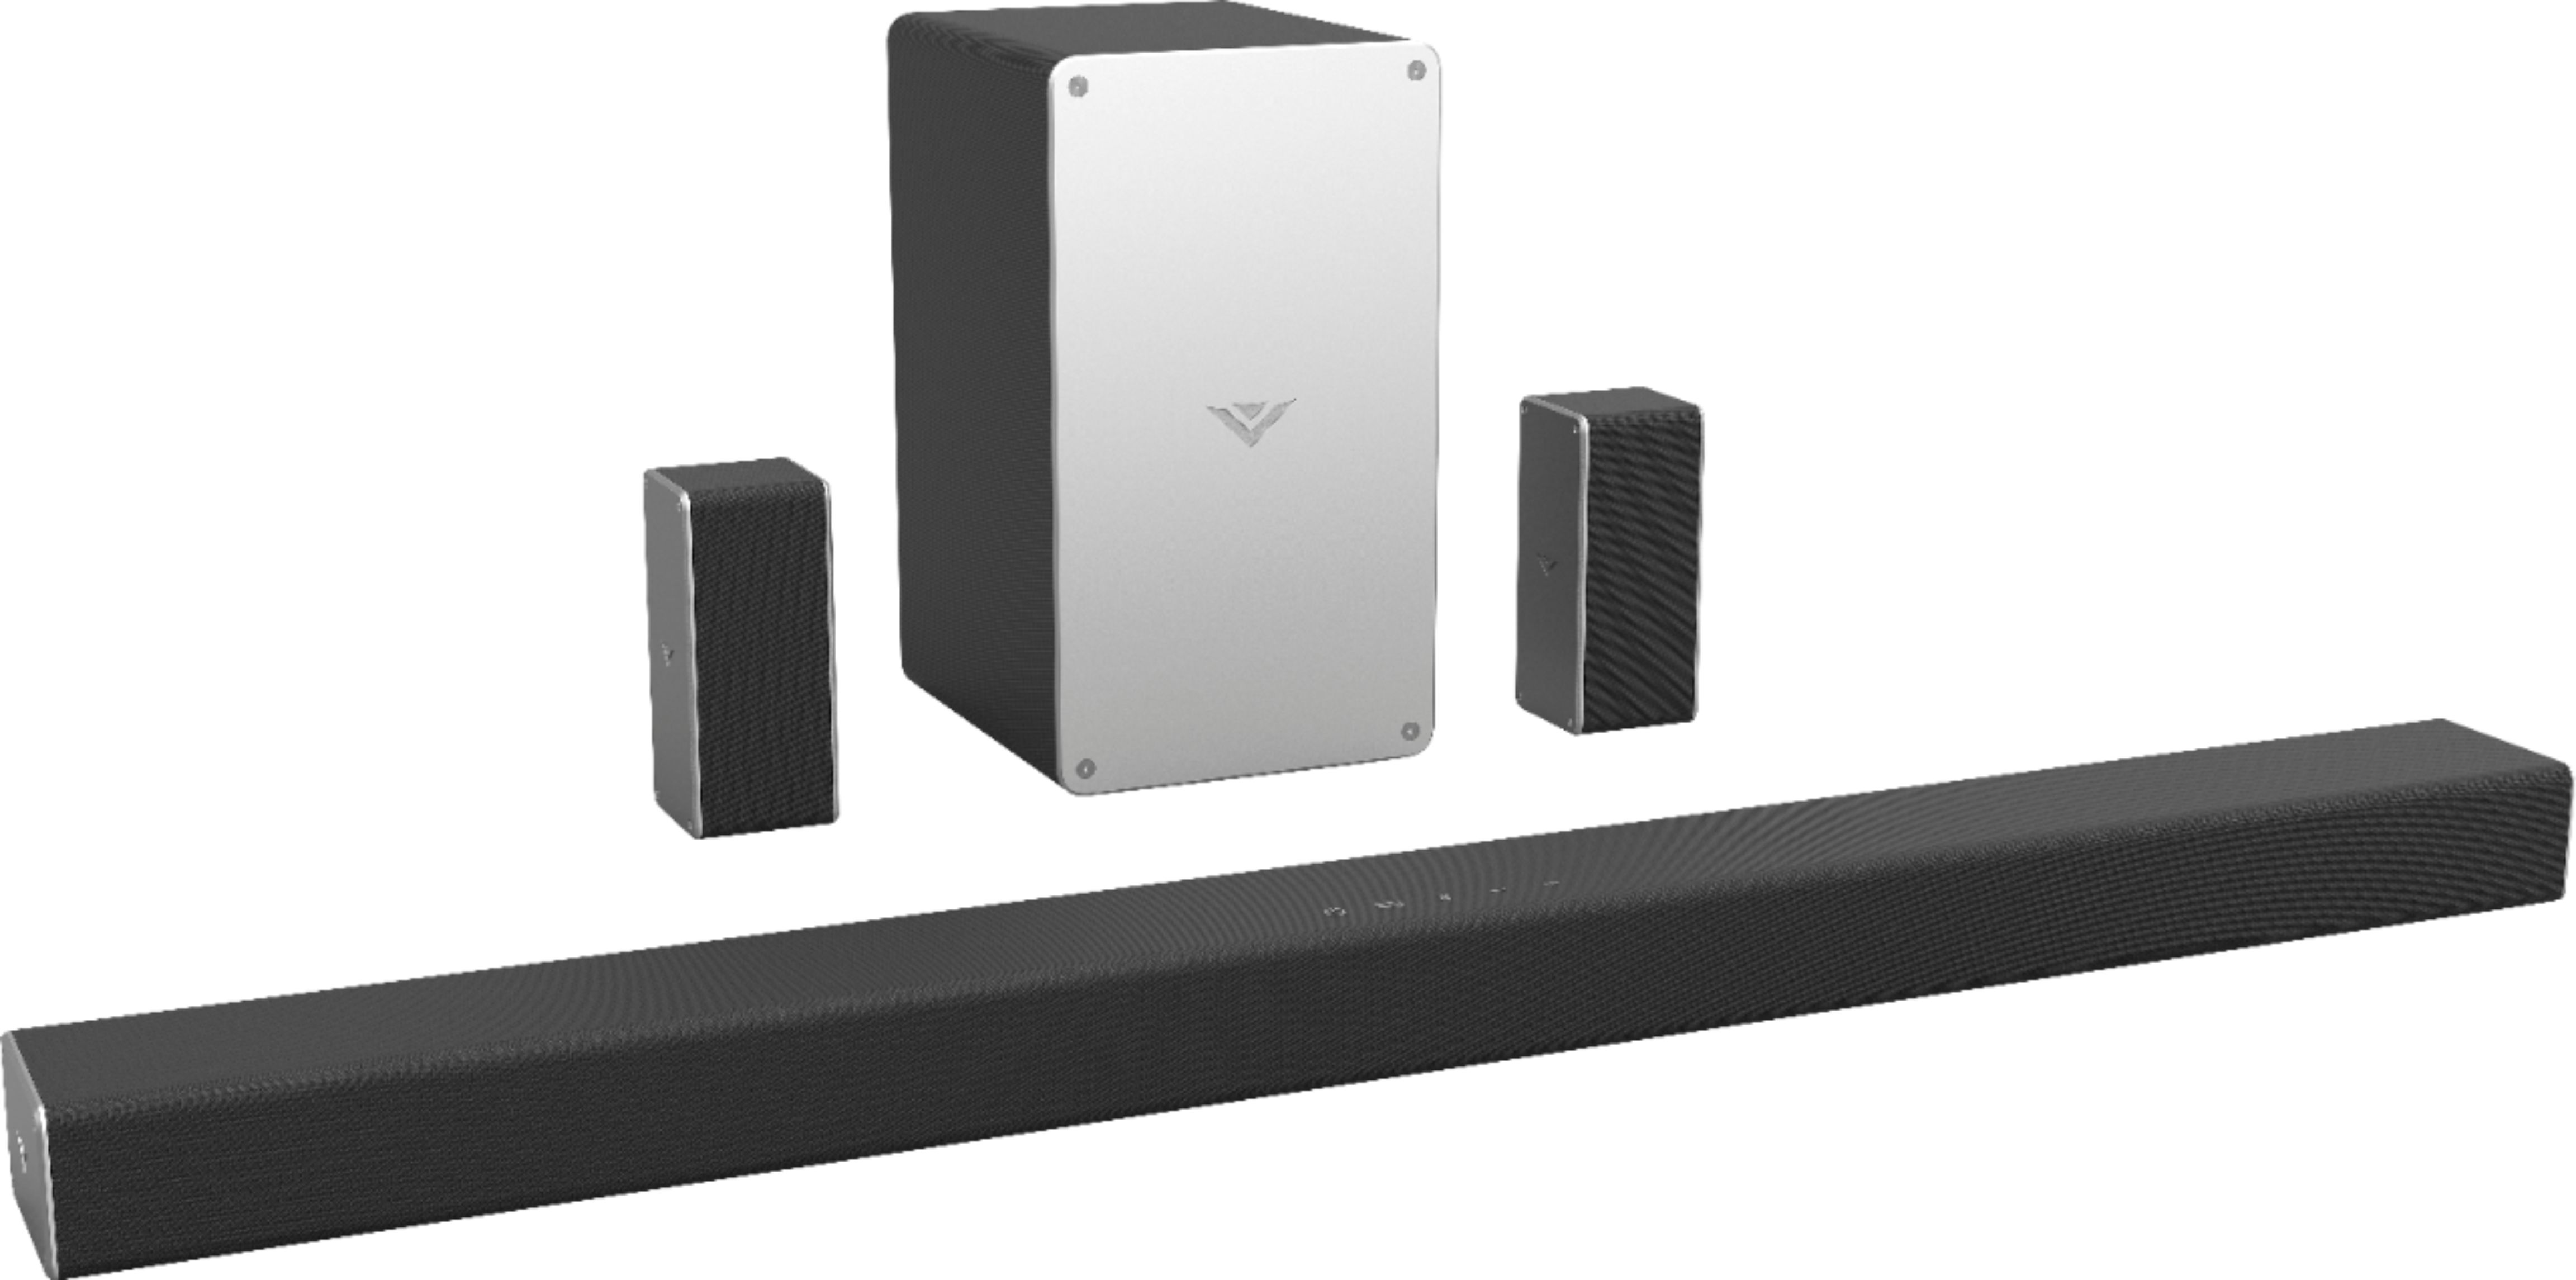 How to Troubleshoot Vizio Subwoofer Pairing Issues? 13